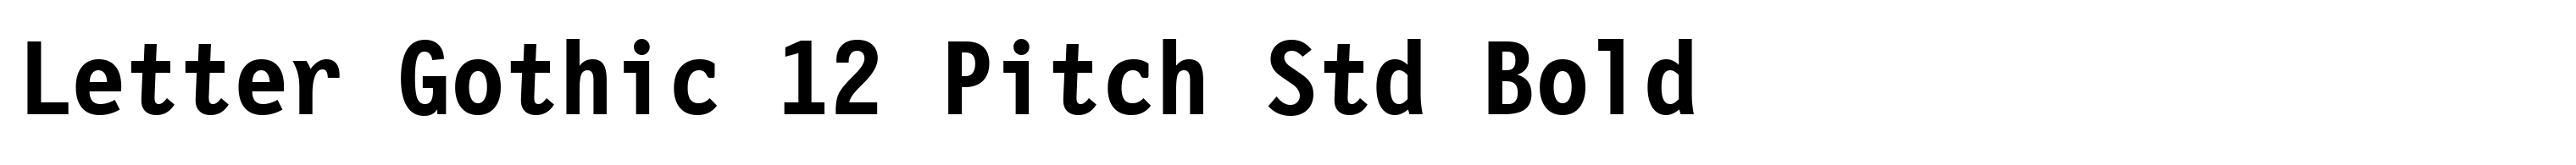 Letter Gothic 12 Pitch Std Bold